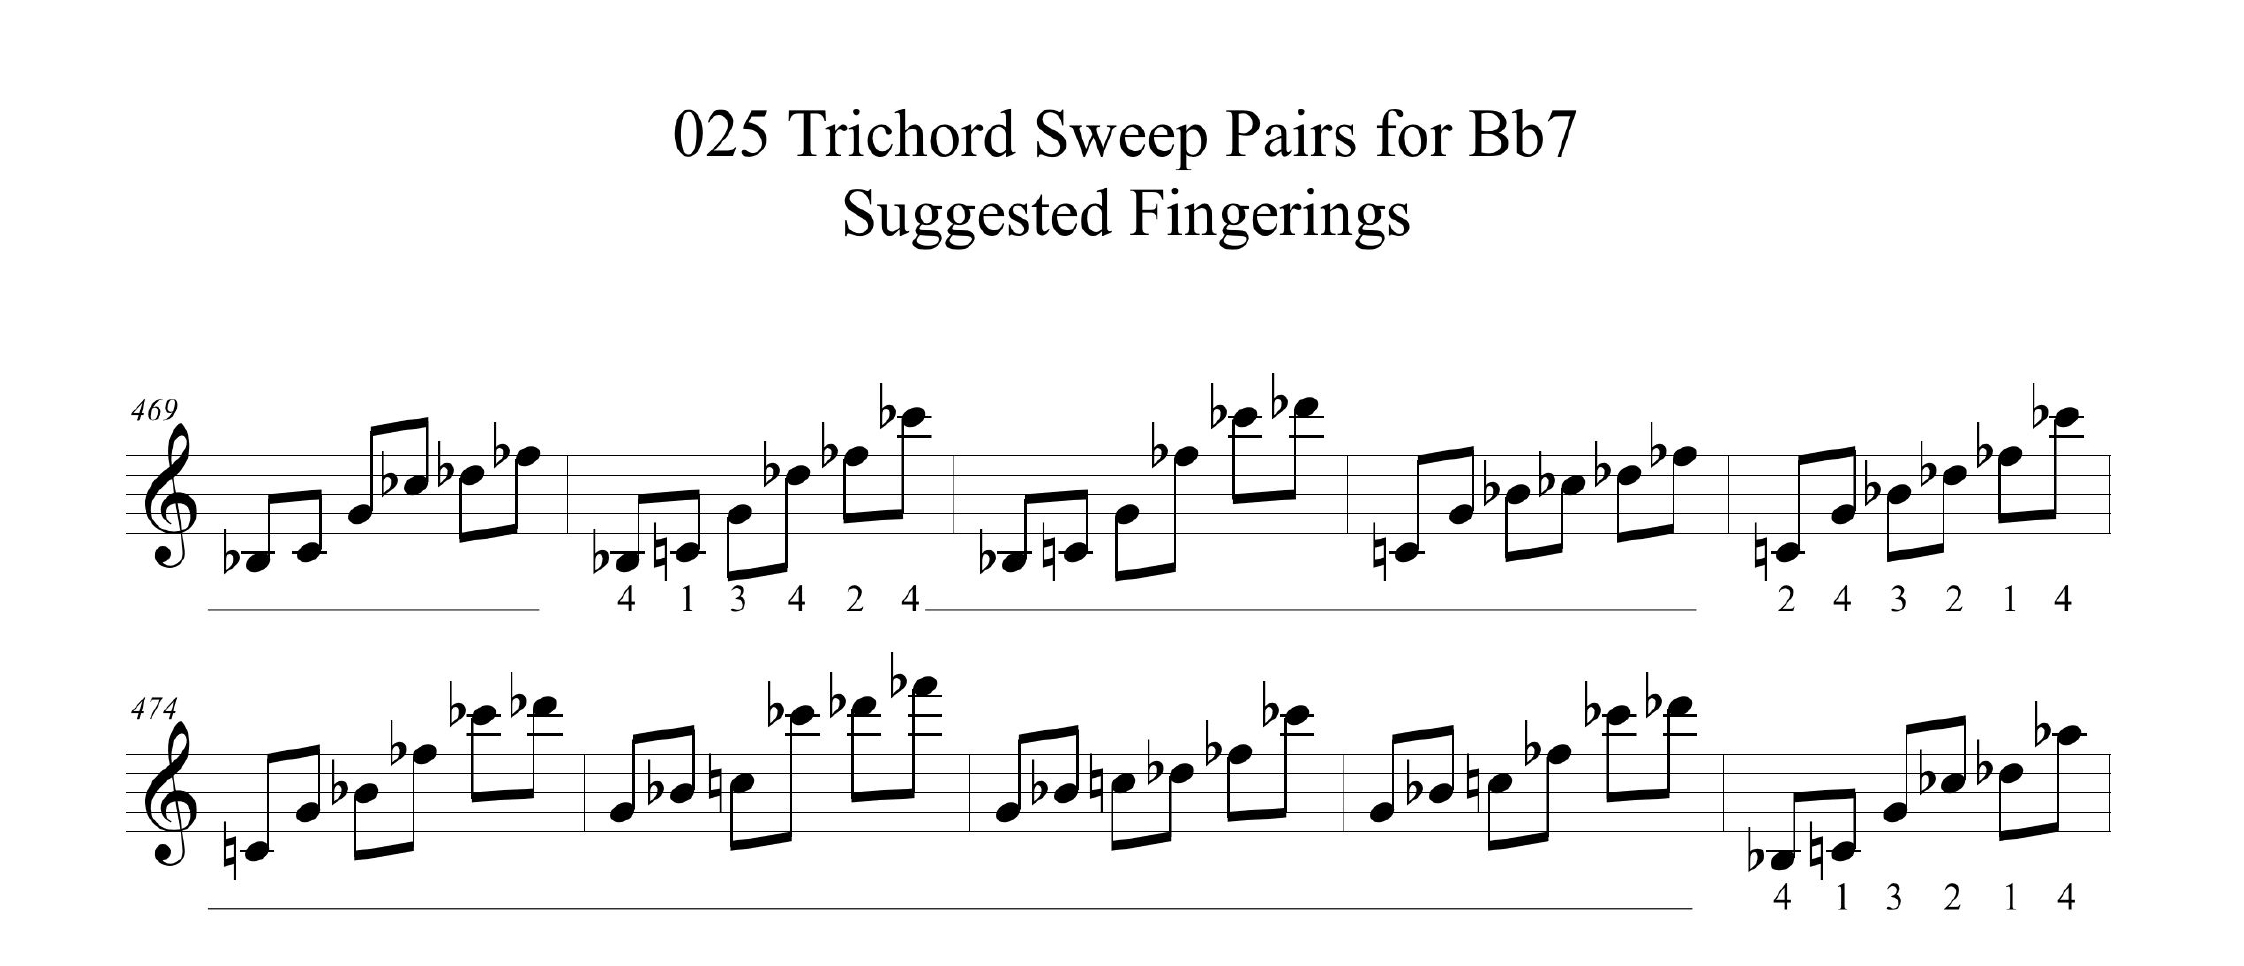 025-Trichord-Sweep-Pairs-Guitar-Instrumentalist-Sweep Arpeggios-for-Bb7 by Bruce Arnold for Muse Eek Publishing Company